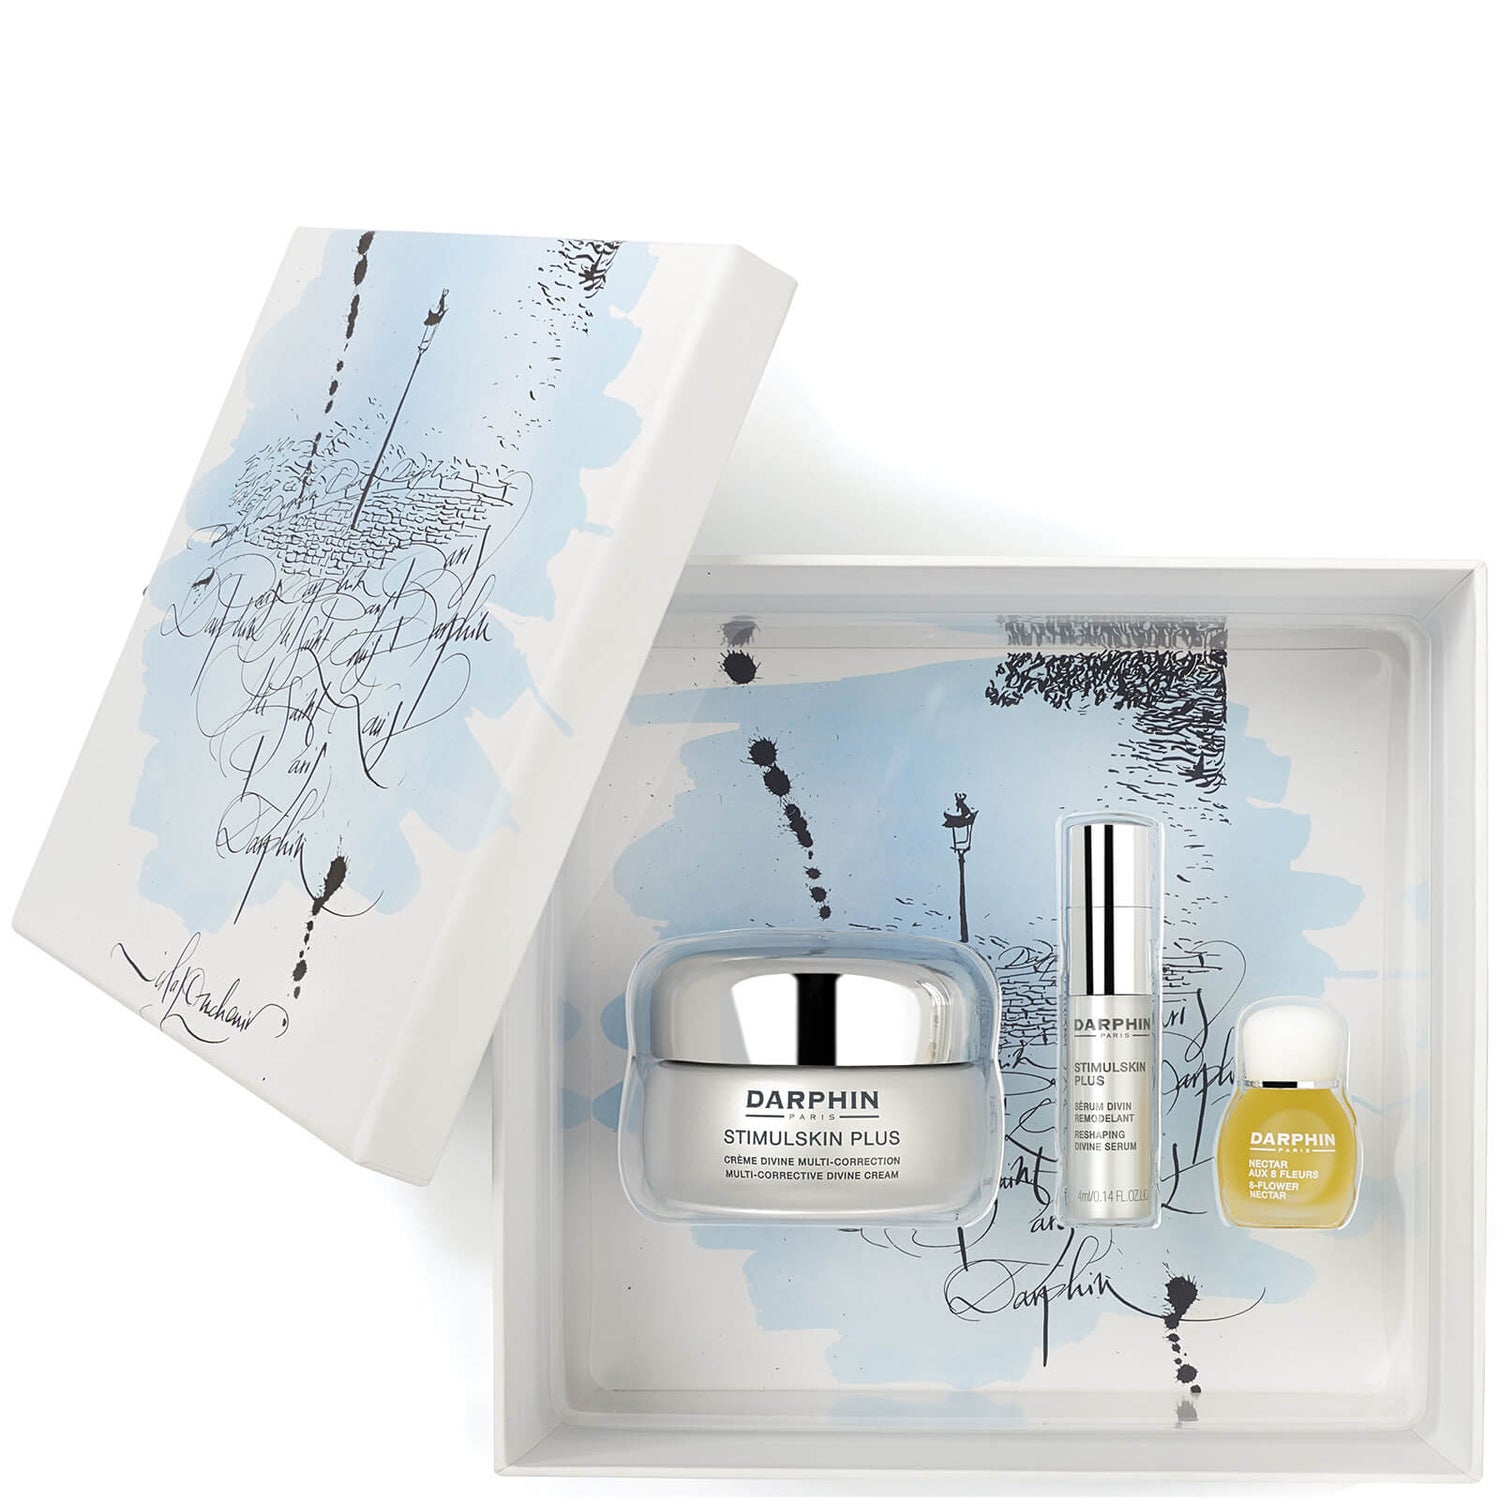 Darphin Le Luxe Total Anti-Ageing Stimulskin Plus Set (Worth £226)